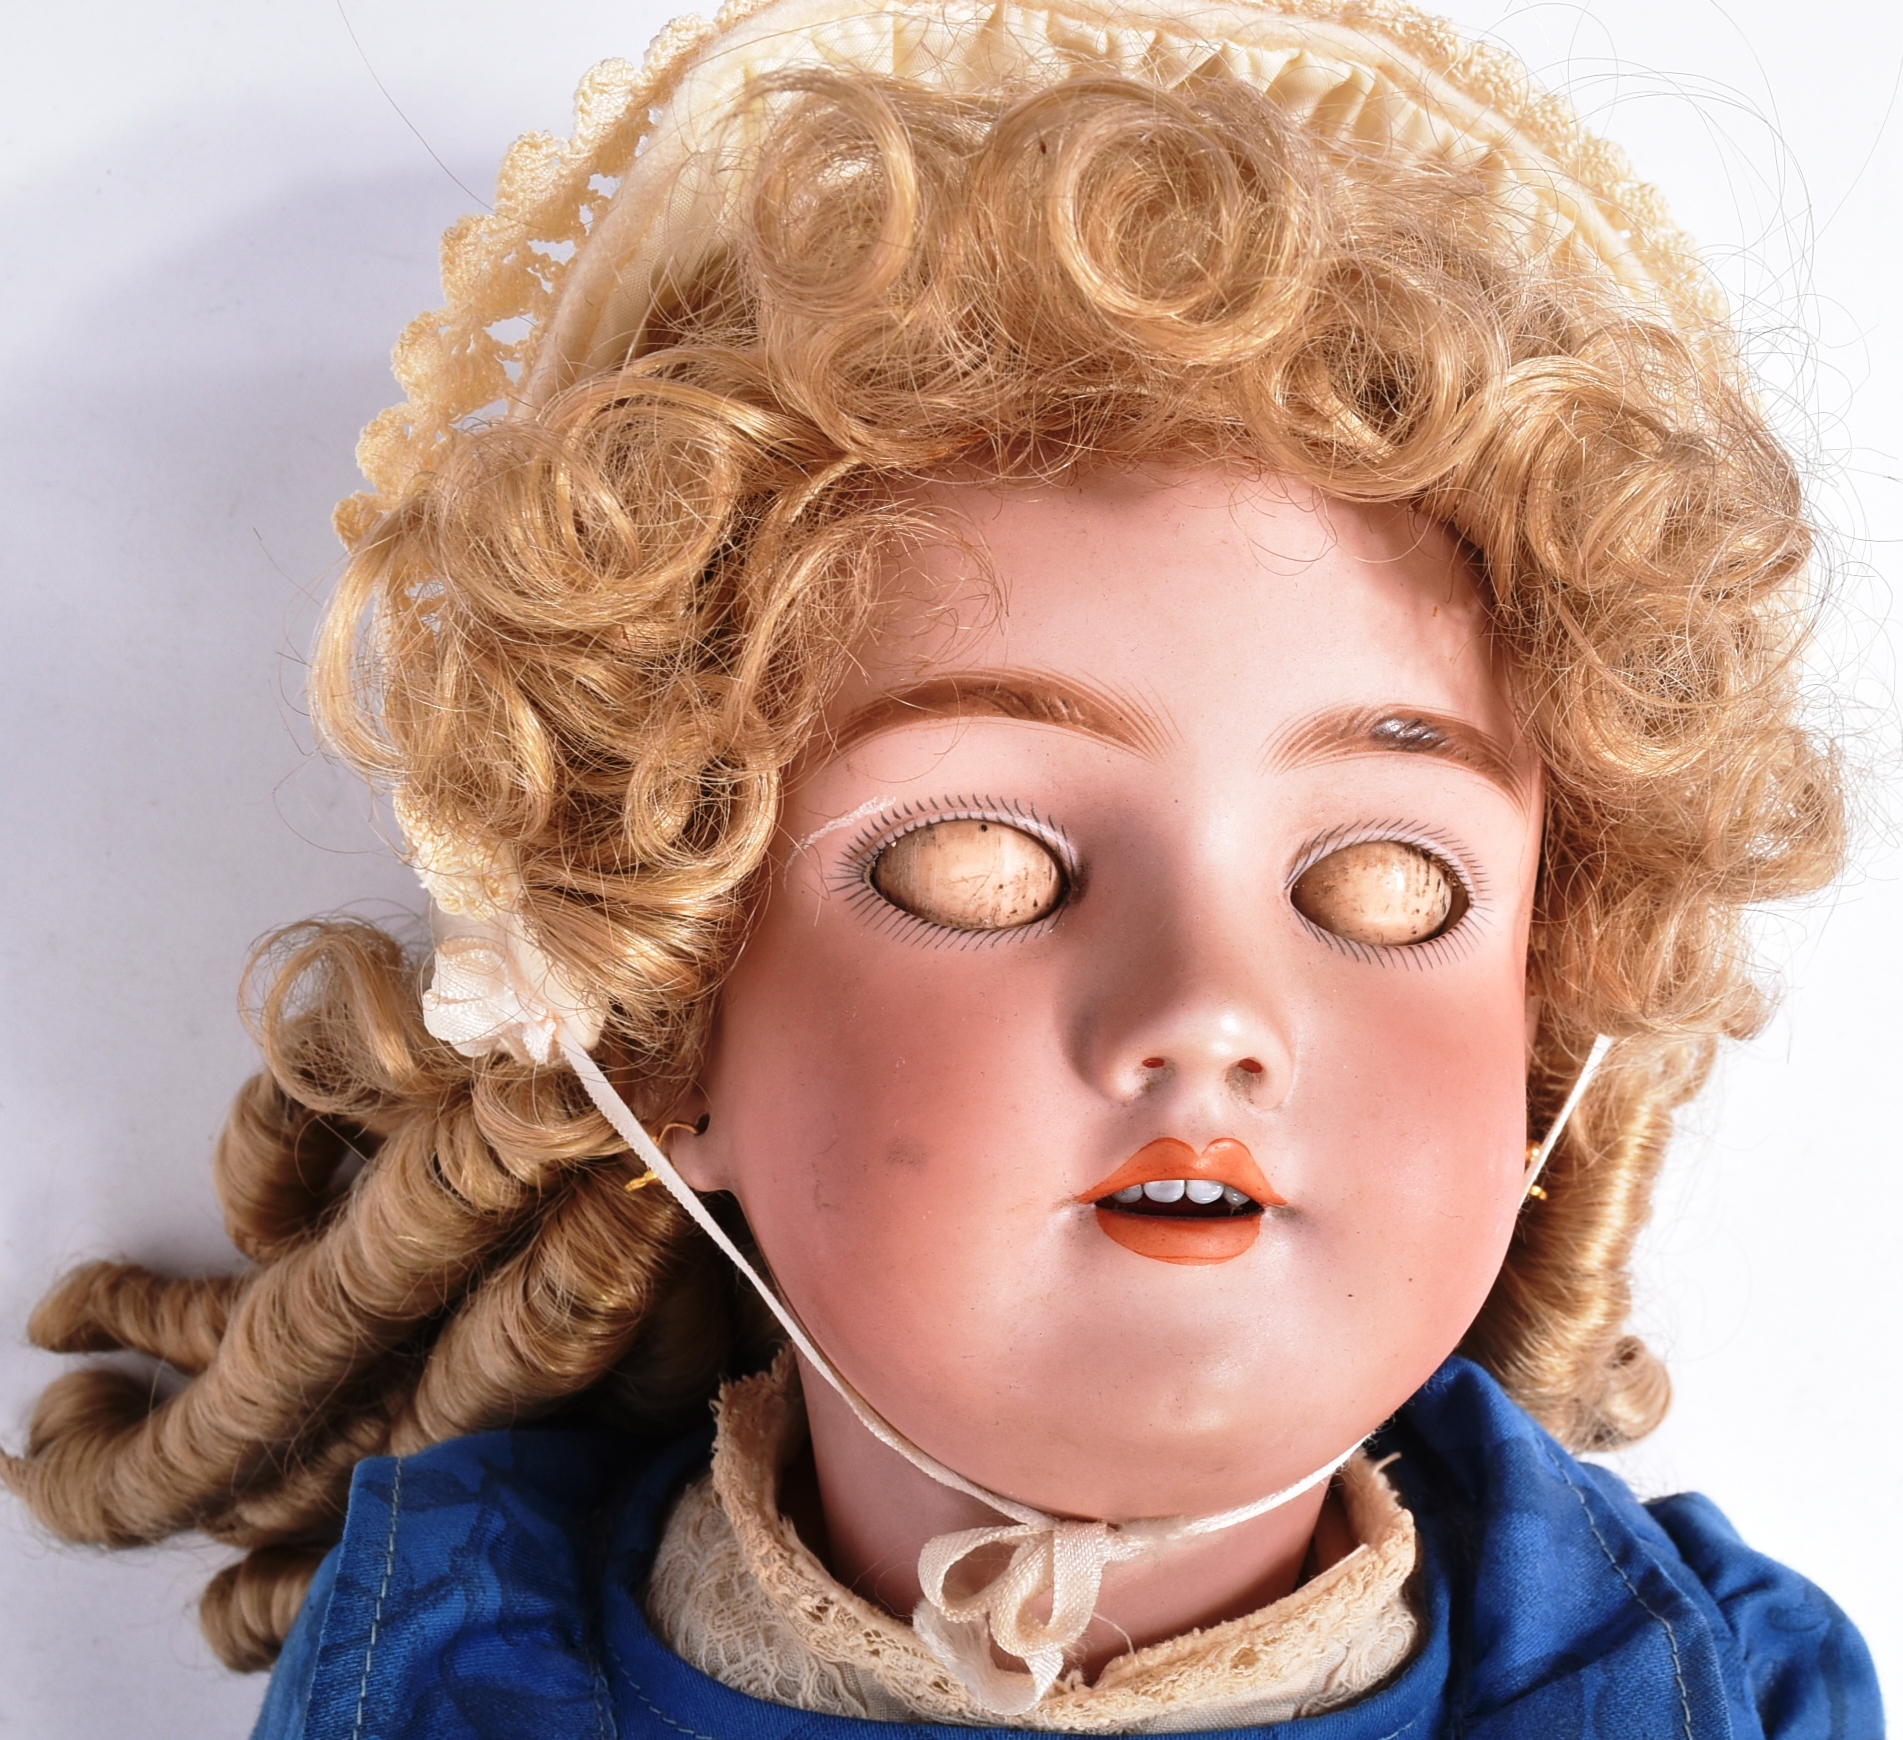 EARLY 20TH CENTURY GERMAN BISQUE HEADED DOLL - Image 4 of 6